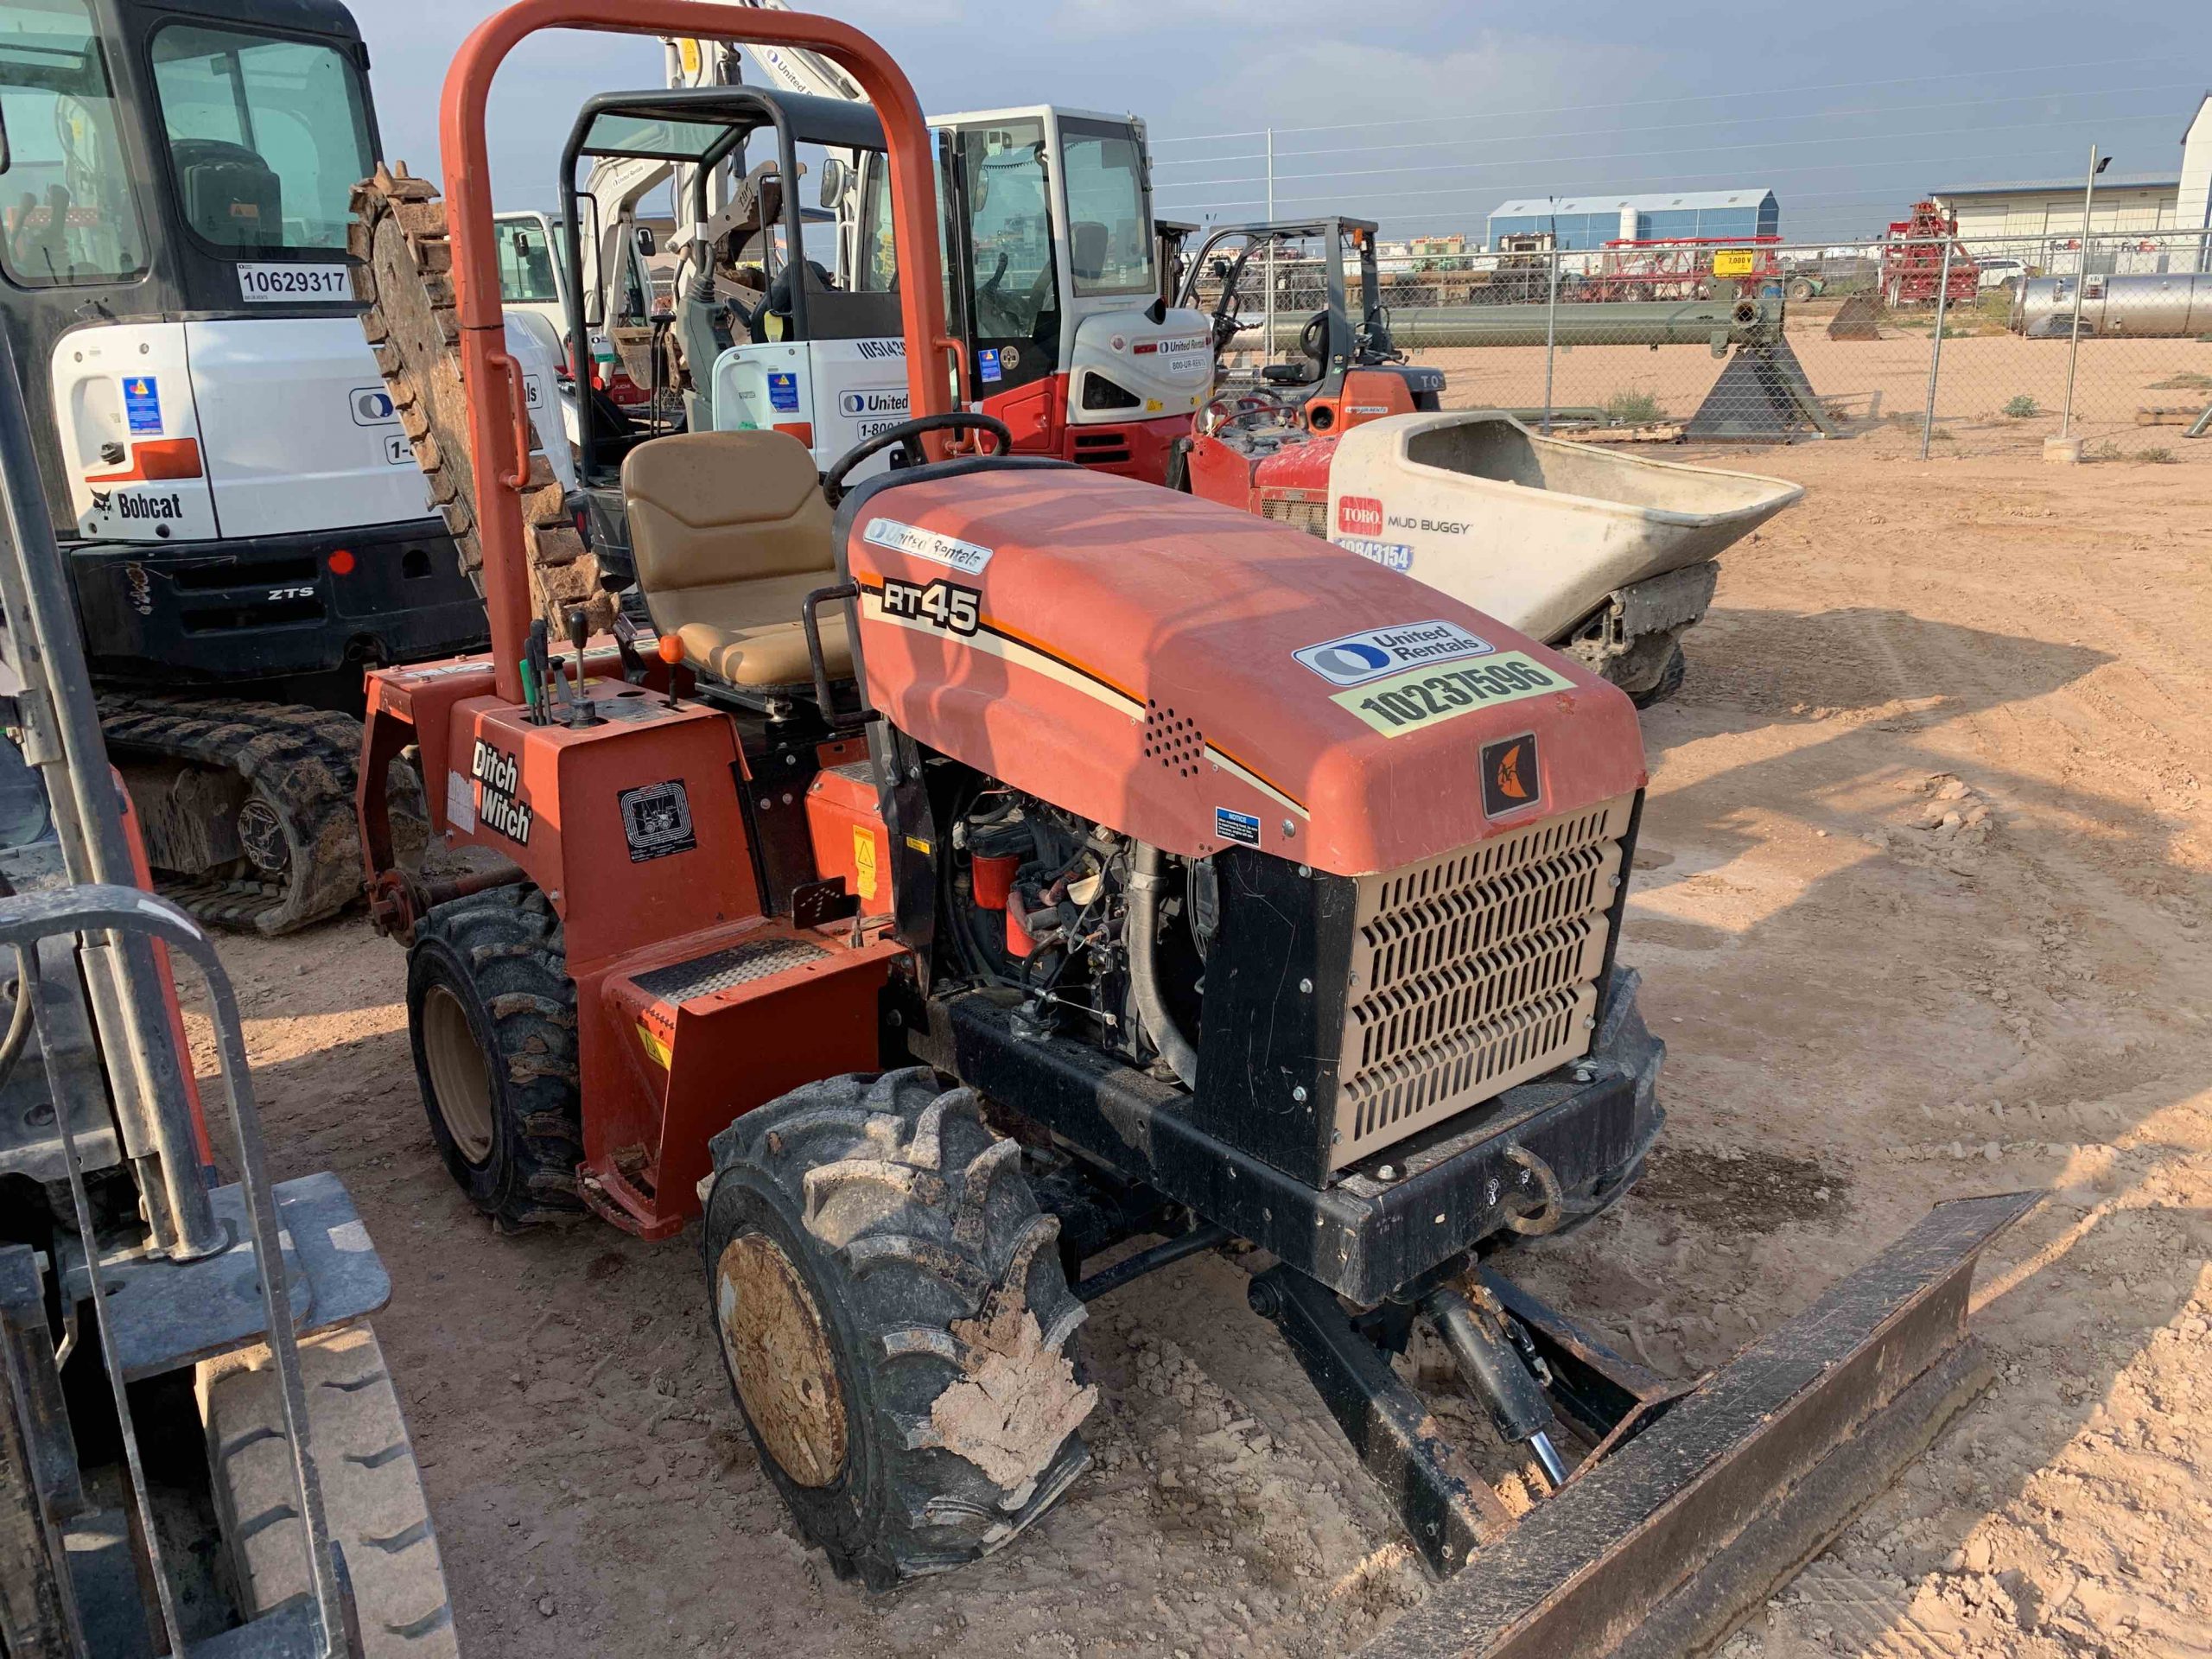 Ditch Witch 1030 Trencher Parts Used 2014 Ditch Witch Rt45 Trencher for Sale In Midland, Tx … Of Ditch Witch 1030 Trencher Parts